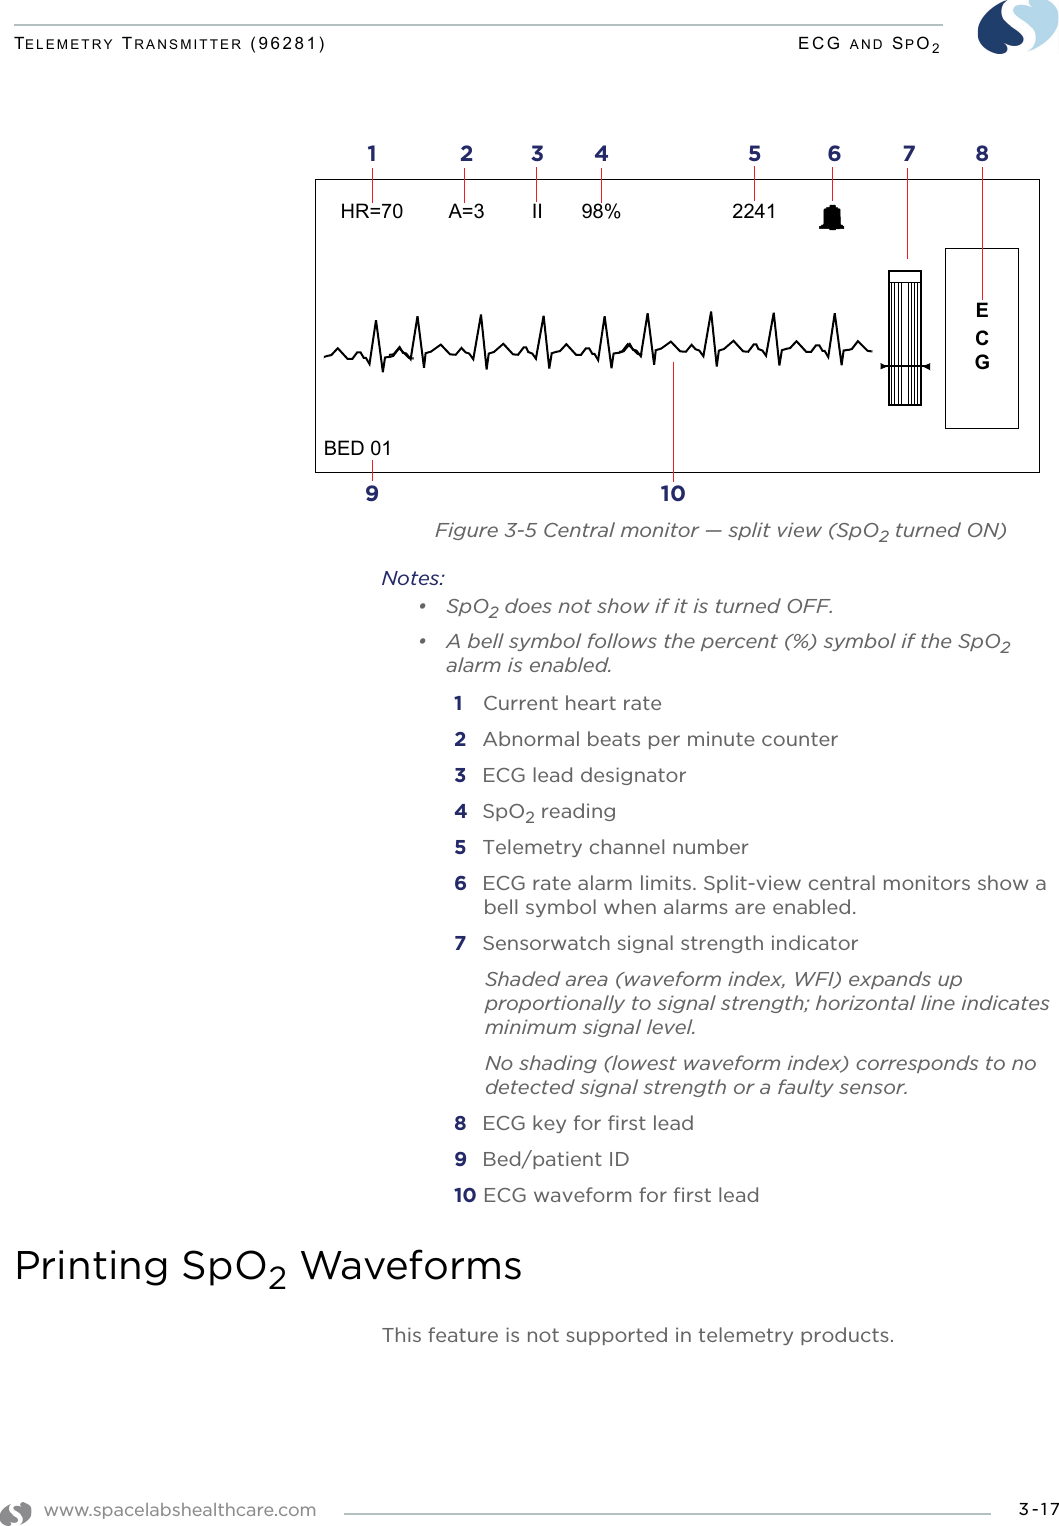 www.spacelabshealthcare.com 3-17TELEMETRY TRANSMITTER (96281) ECG AND SPO2Figure 3-5 Central monitor — split view (SpO2 turned ON)Notes:•SpO2 does not show if it is turned OFF.• A bell symbol follows the percent (%) symbol if the SpO2 alarm is enabled.1  Current heart rate2 Abnormal beats per minute counter 3 ECG lead designator4 SpO2 reading5 Telemetry channel number6 ECG rate alarm limits. Split-view central monitors show a bell symbol when alarms are enabled.7 Sensorwatch signal strength indicatorShaded area (waveform index, WFI) expands up proportionally to signal strength; horizontal line indicates minimum signal level.No shading (lowest waveform index) corresponds to no detected signal strength or a faulty sensor.8 ECG key for first lead9 Bed/patient ID10 ECG waveform for first leadPrinting SpO2 WaveformsThis feature is not supported in telemetry products.1234 5678HR=70 A=3 II 98% 2241ECGBED 01910